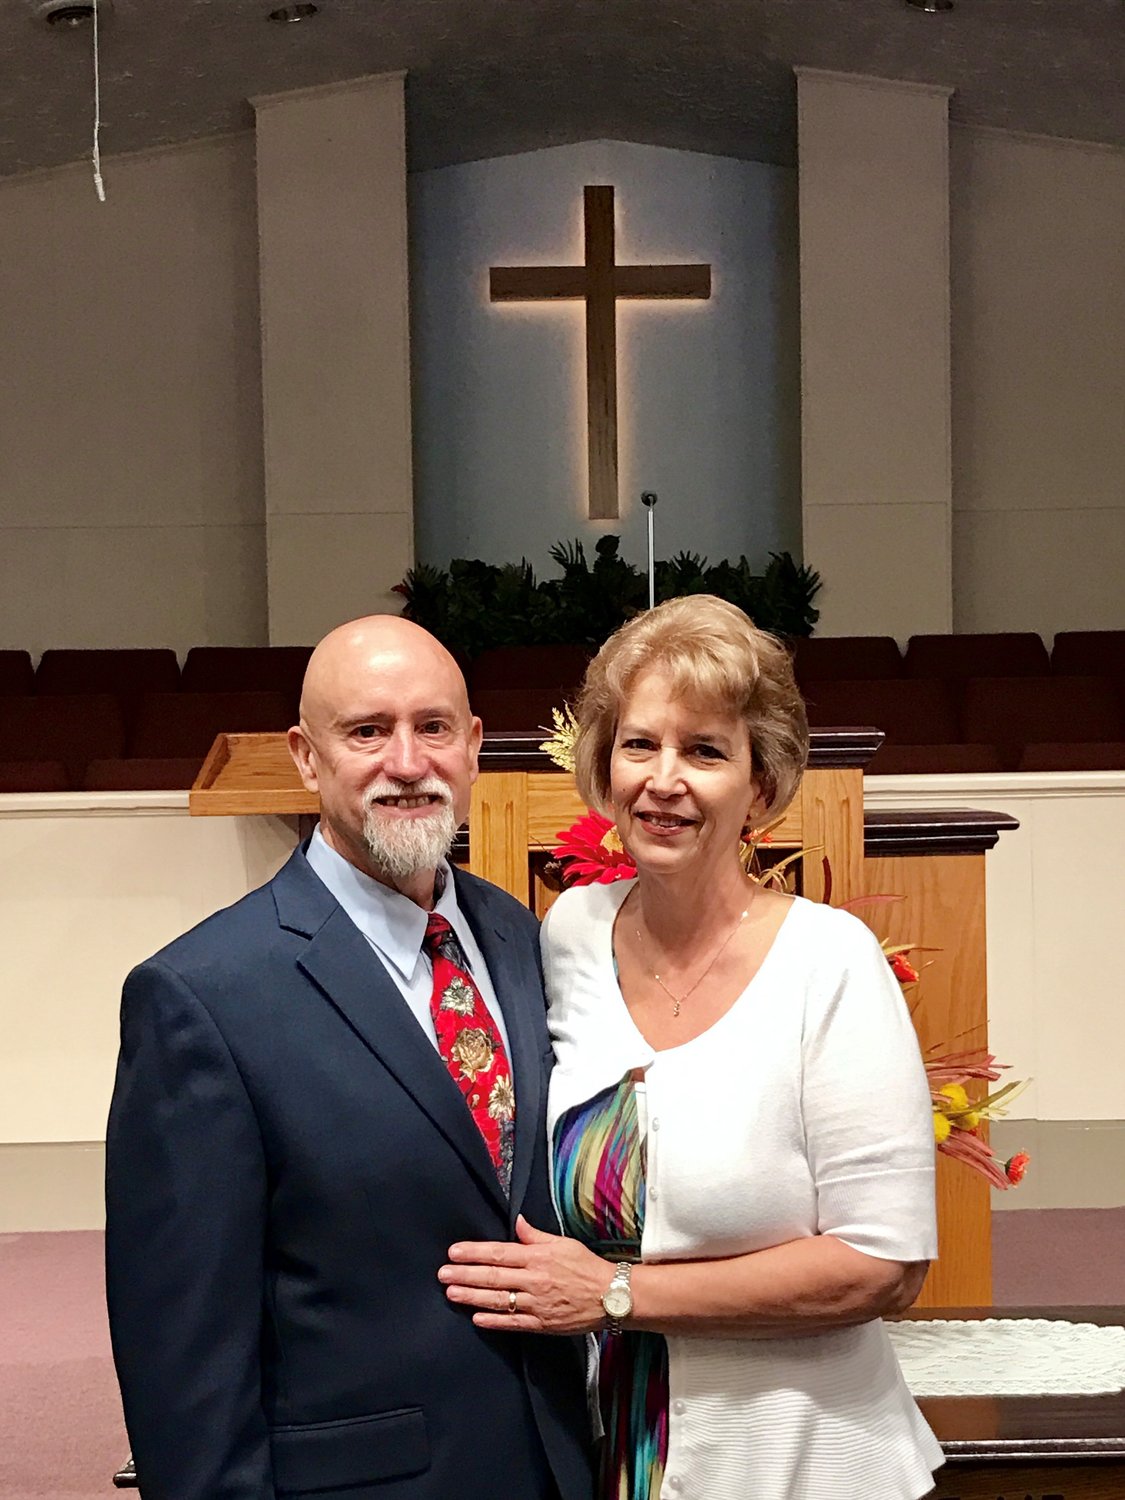 Joey and Nancy Seabolt pose for a photograph at Philippi Baptist Church.